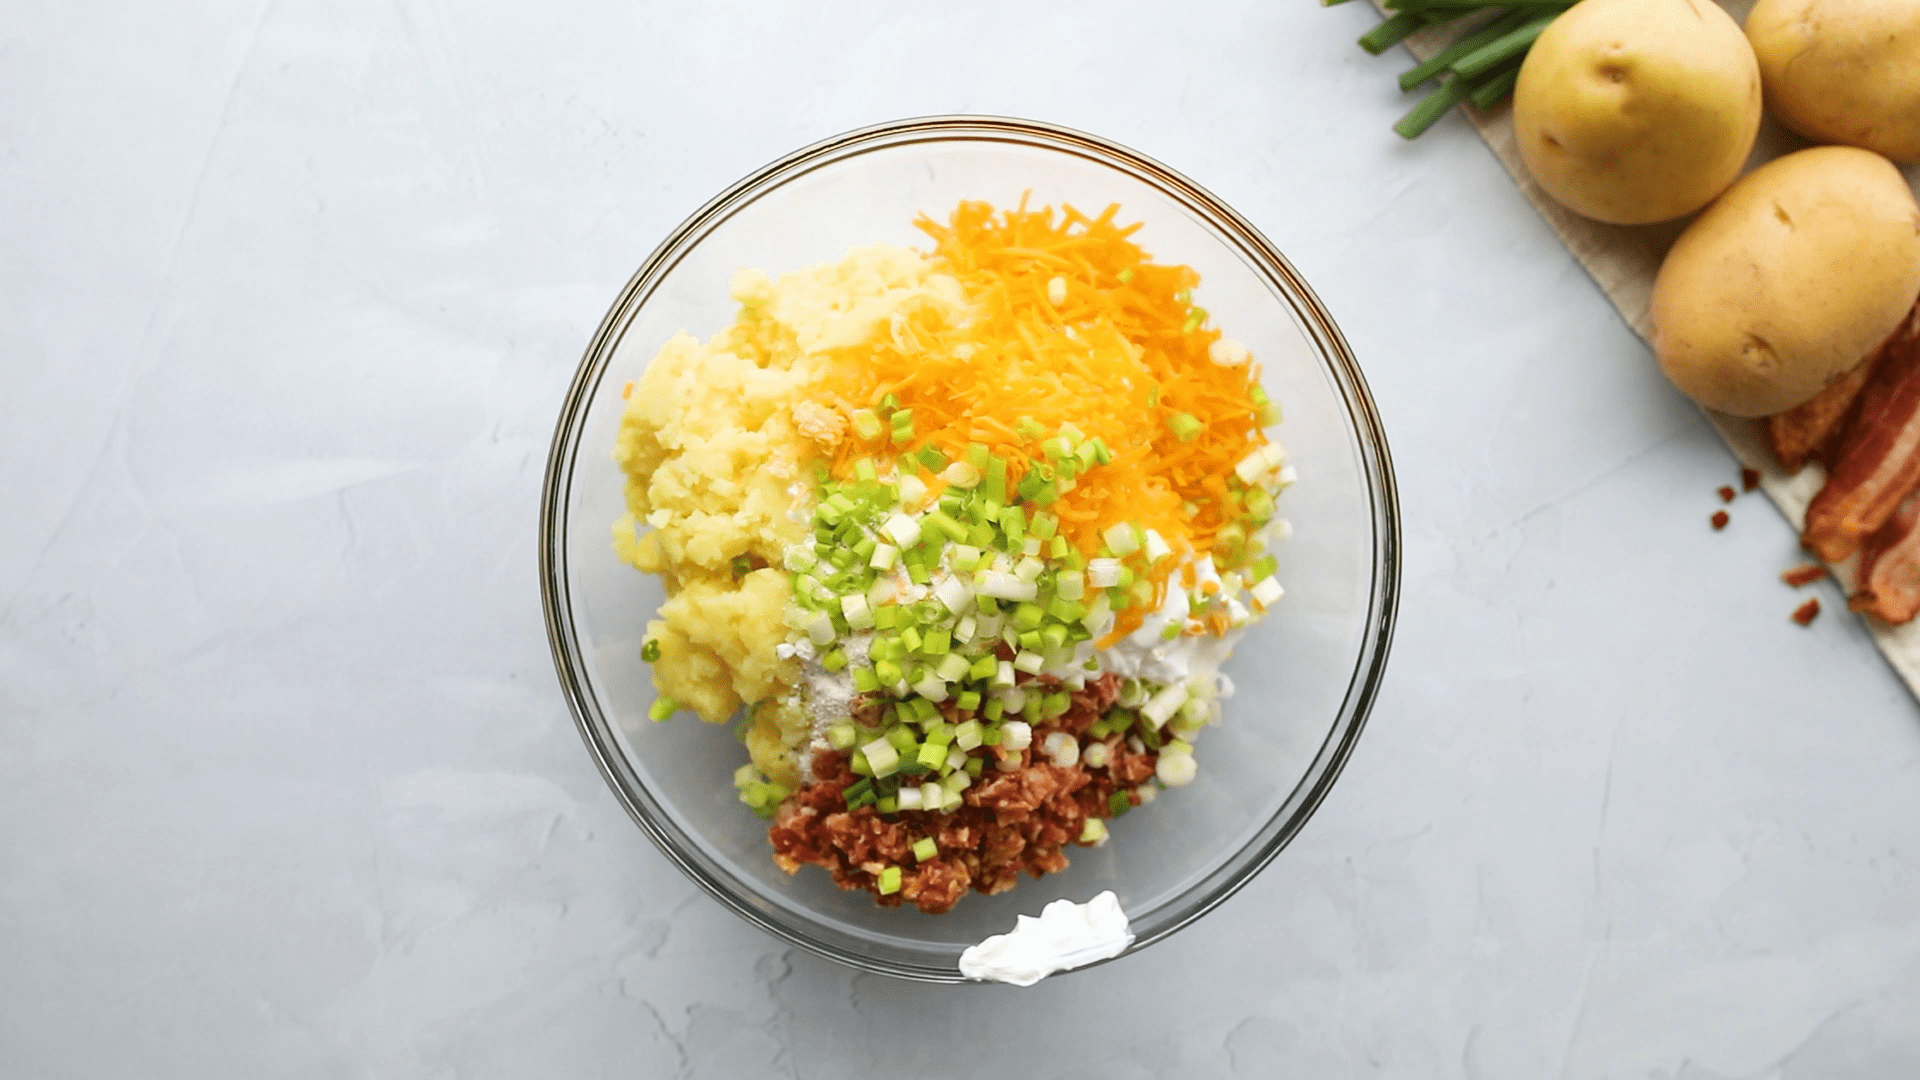 A bowl filled with Loaded Mashed Potatoes ingredients